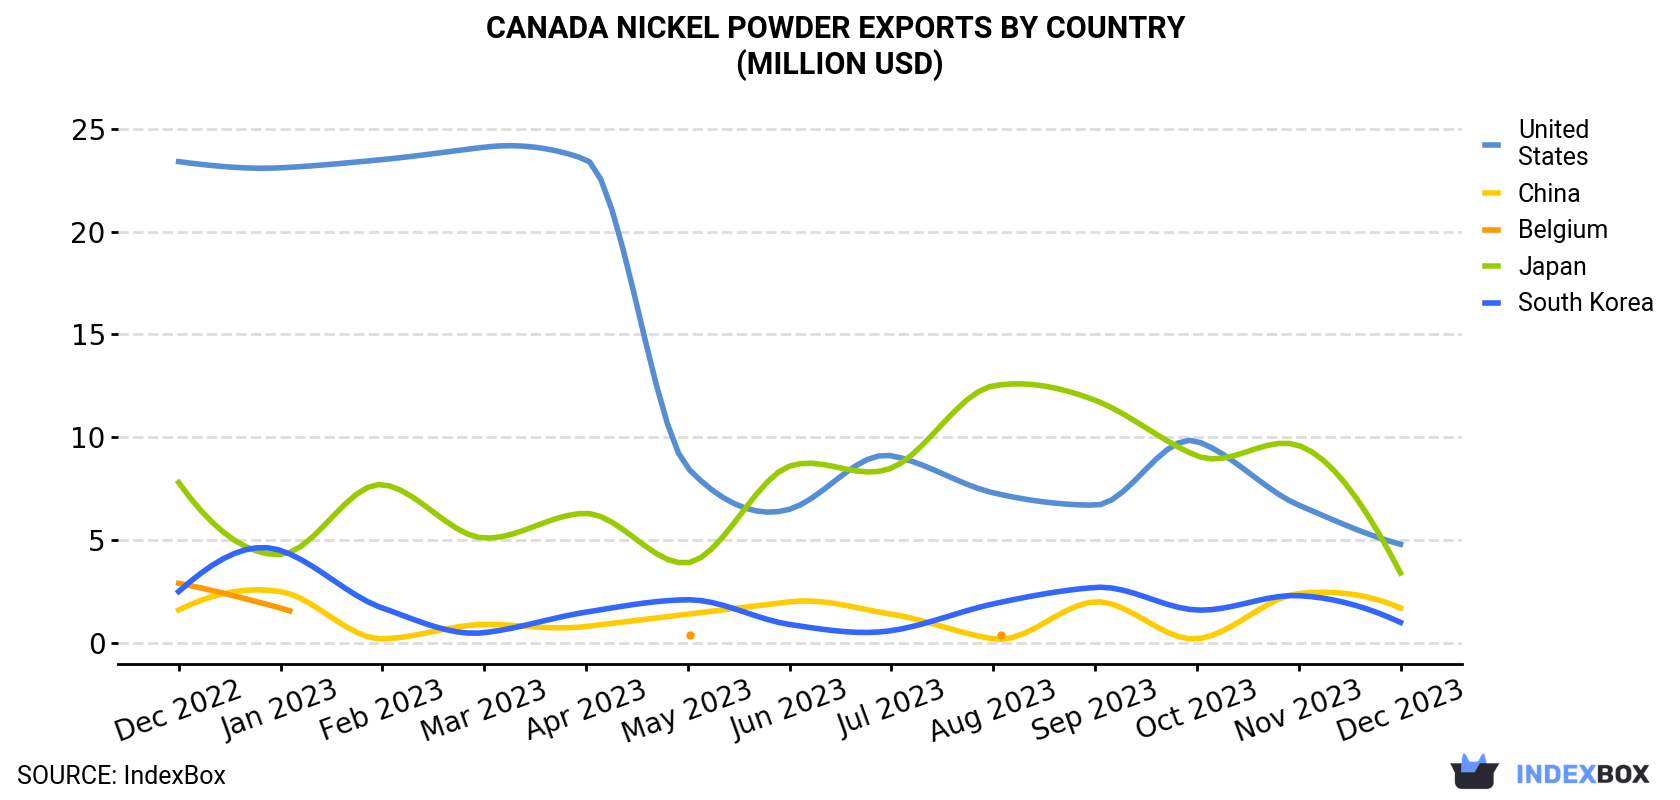 Canada Nickel Powder Exports By Country (Million USD)